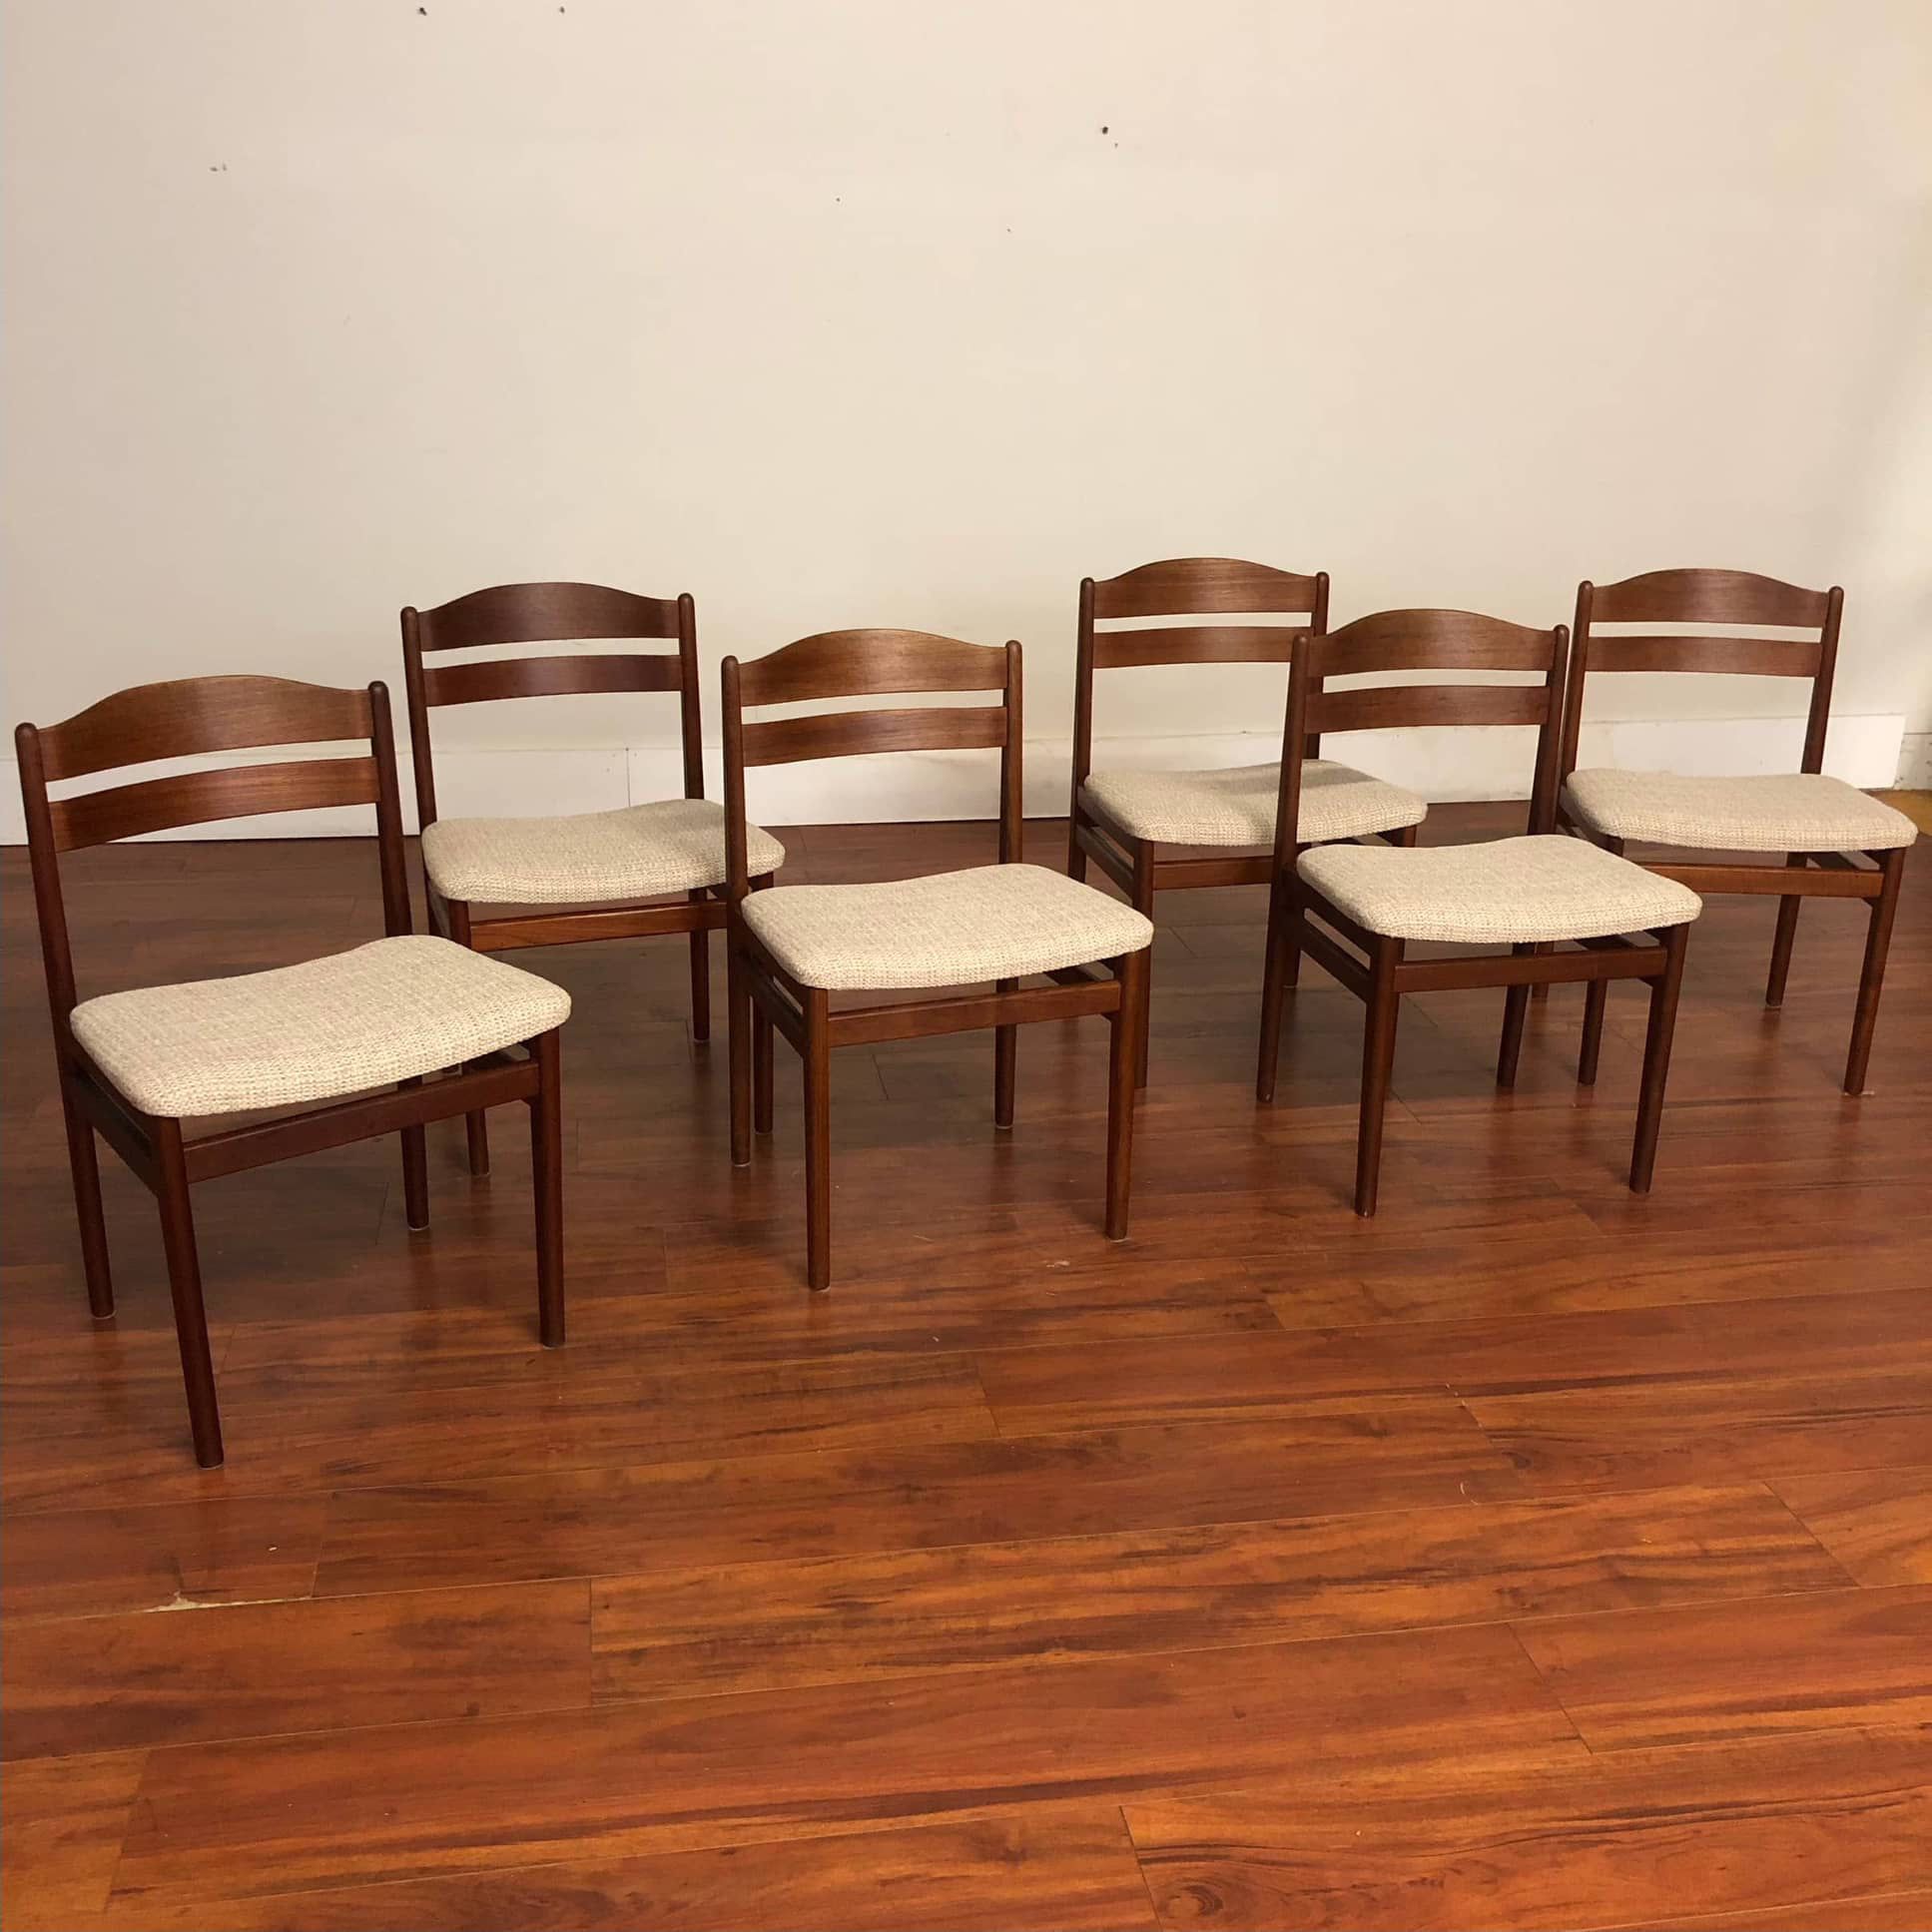 Vintage Mid-Century Dining Chairs Set of 6 - Many More Items In Stock!